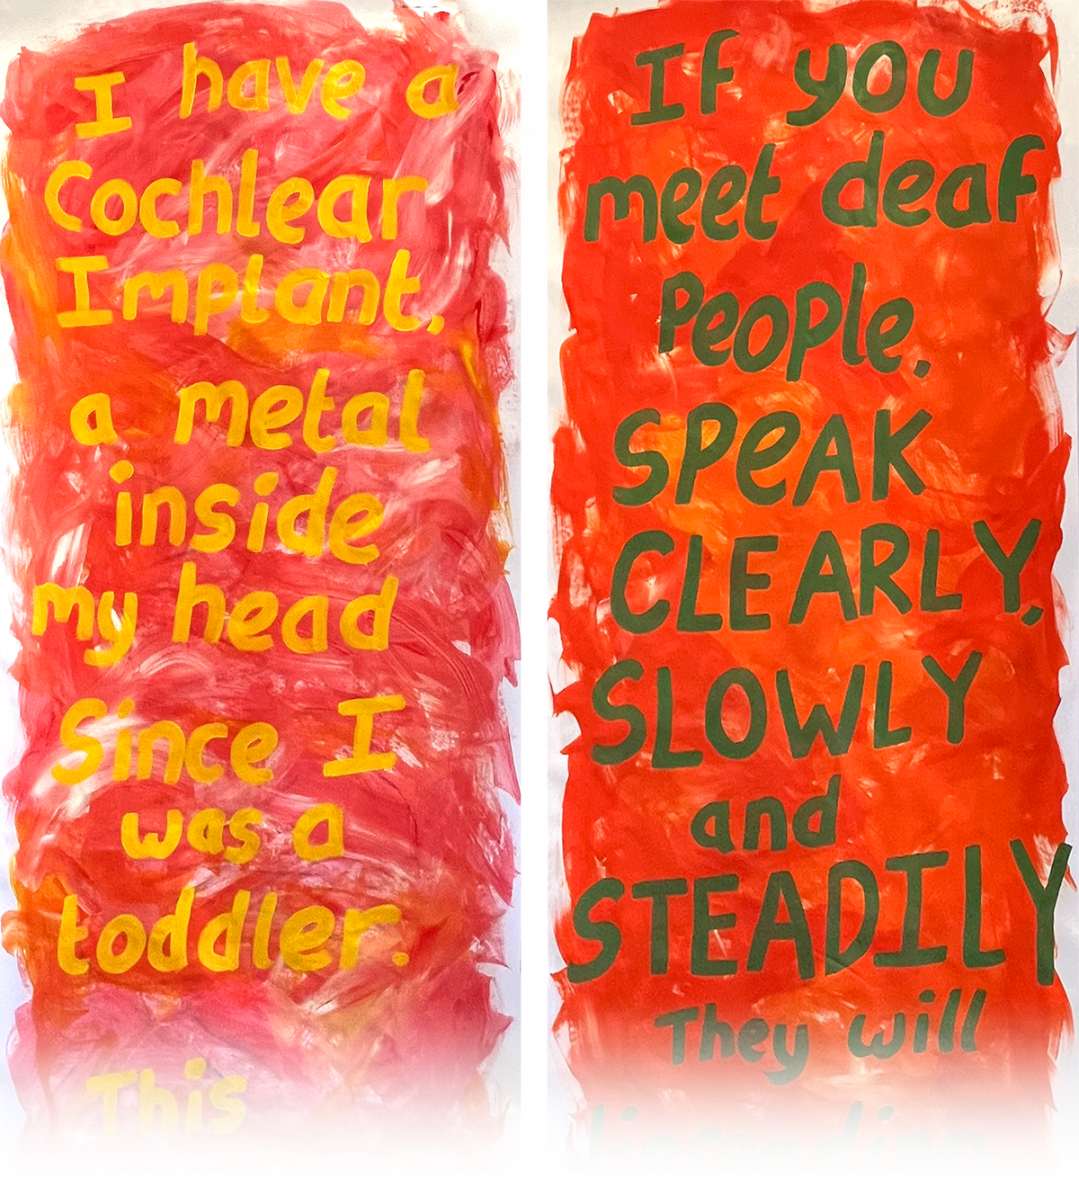 Two posters with hand-drawn typography. The first reads, 'I have a cochlear implant, a mental inside my head since I was a toddler'. The second reads, 'If you meet deaf people. SPEAK CLEARLY, SLOWLY and STEADILY'.